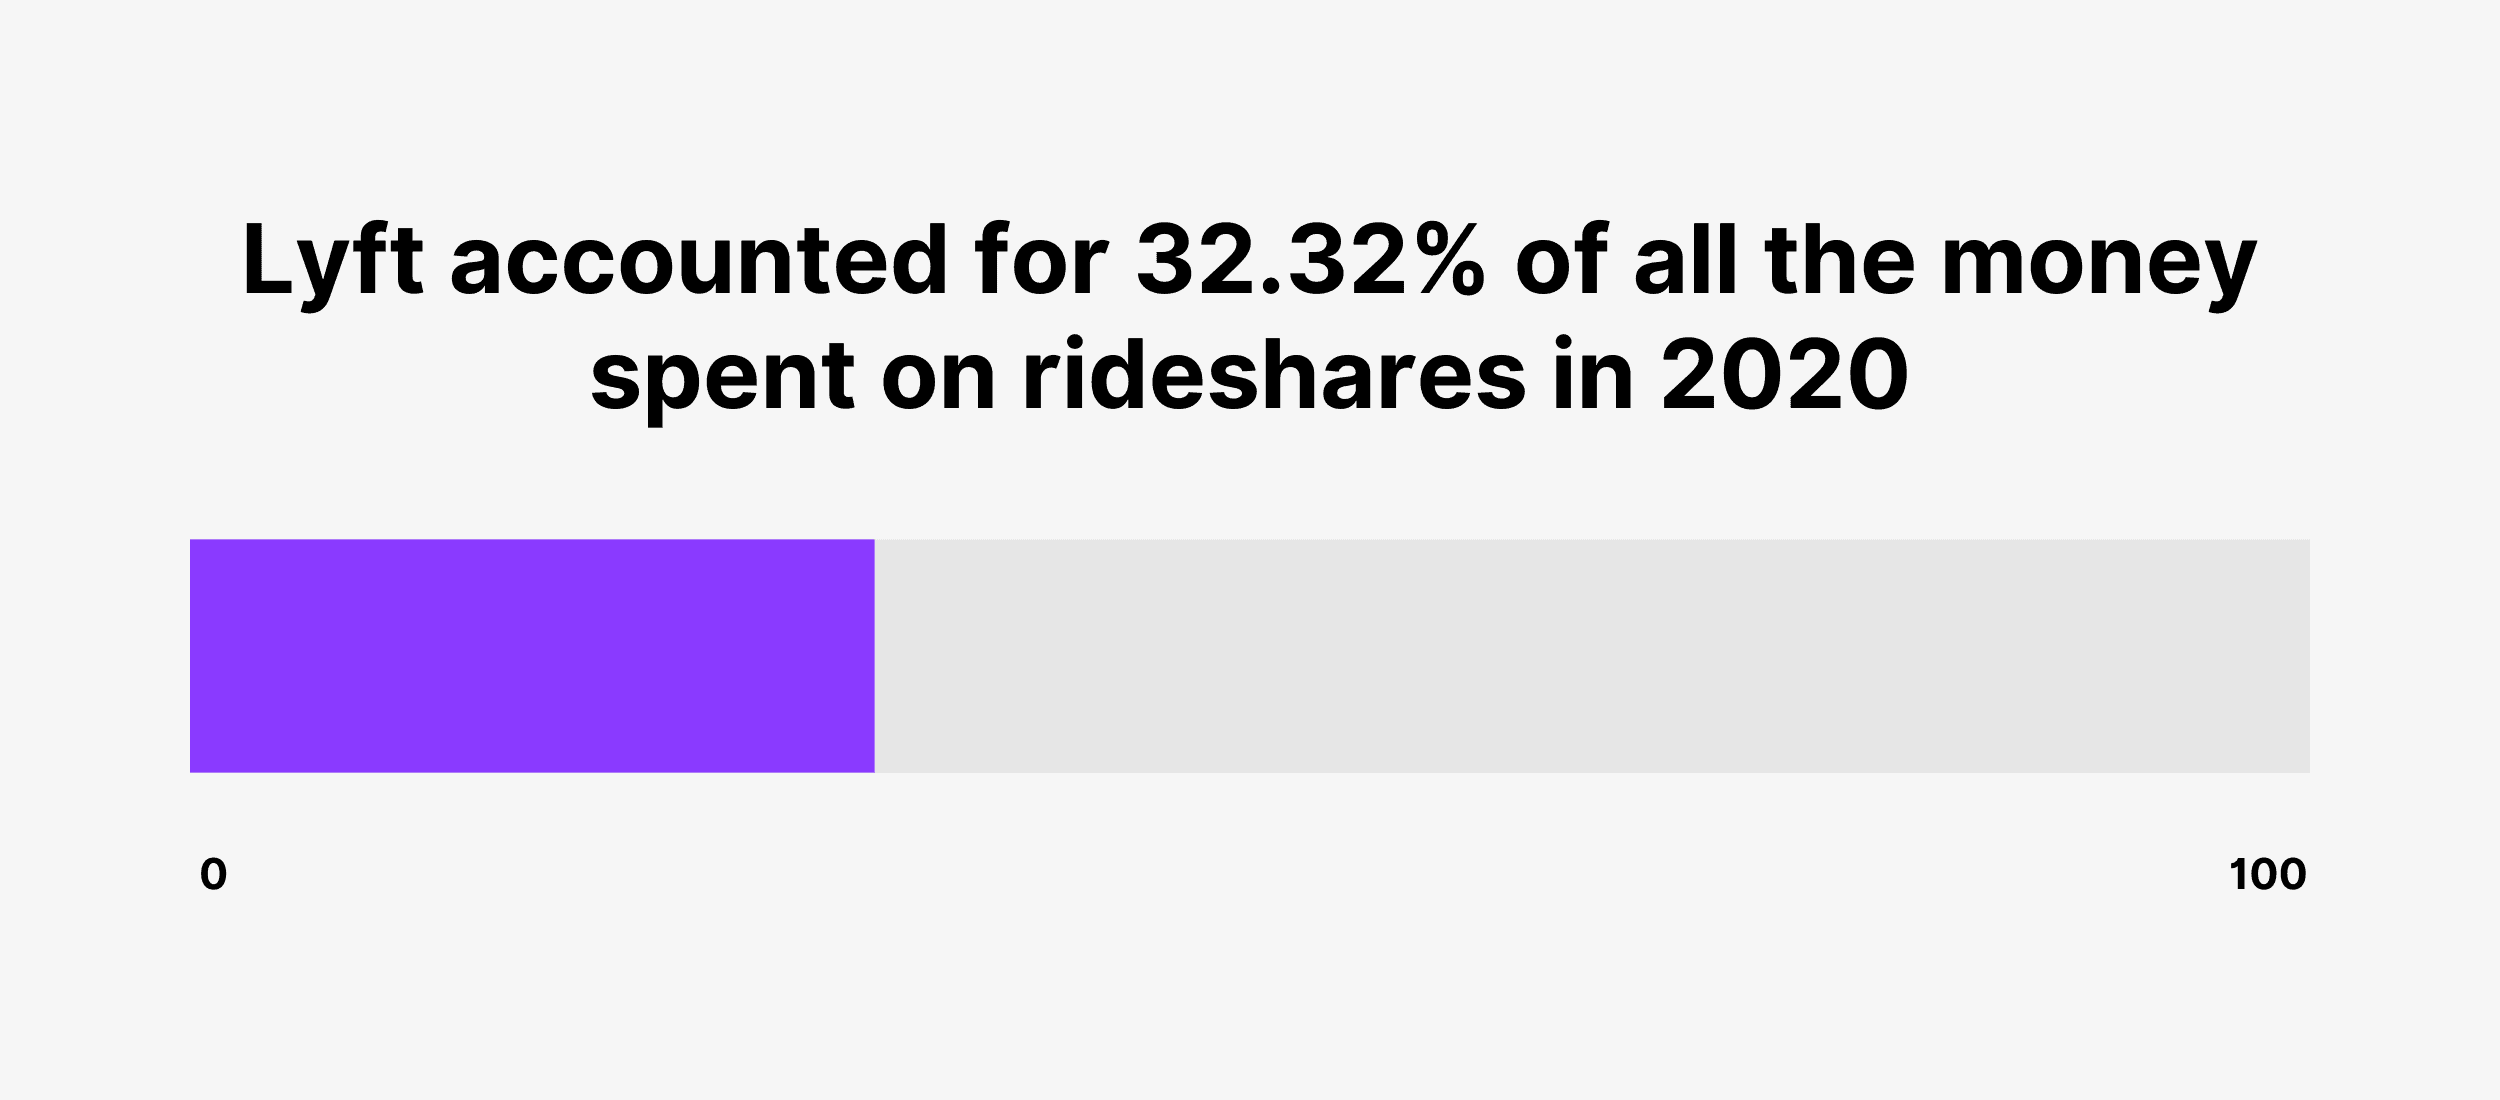 Lyft accounted for 32.32% of all the money spent on rideshares in 2020